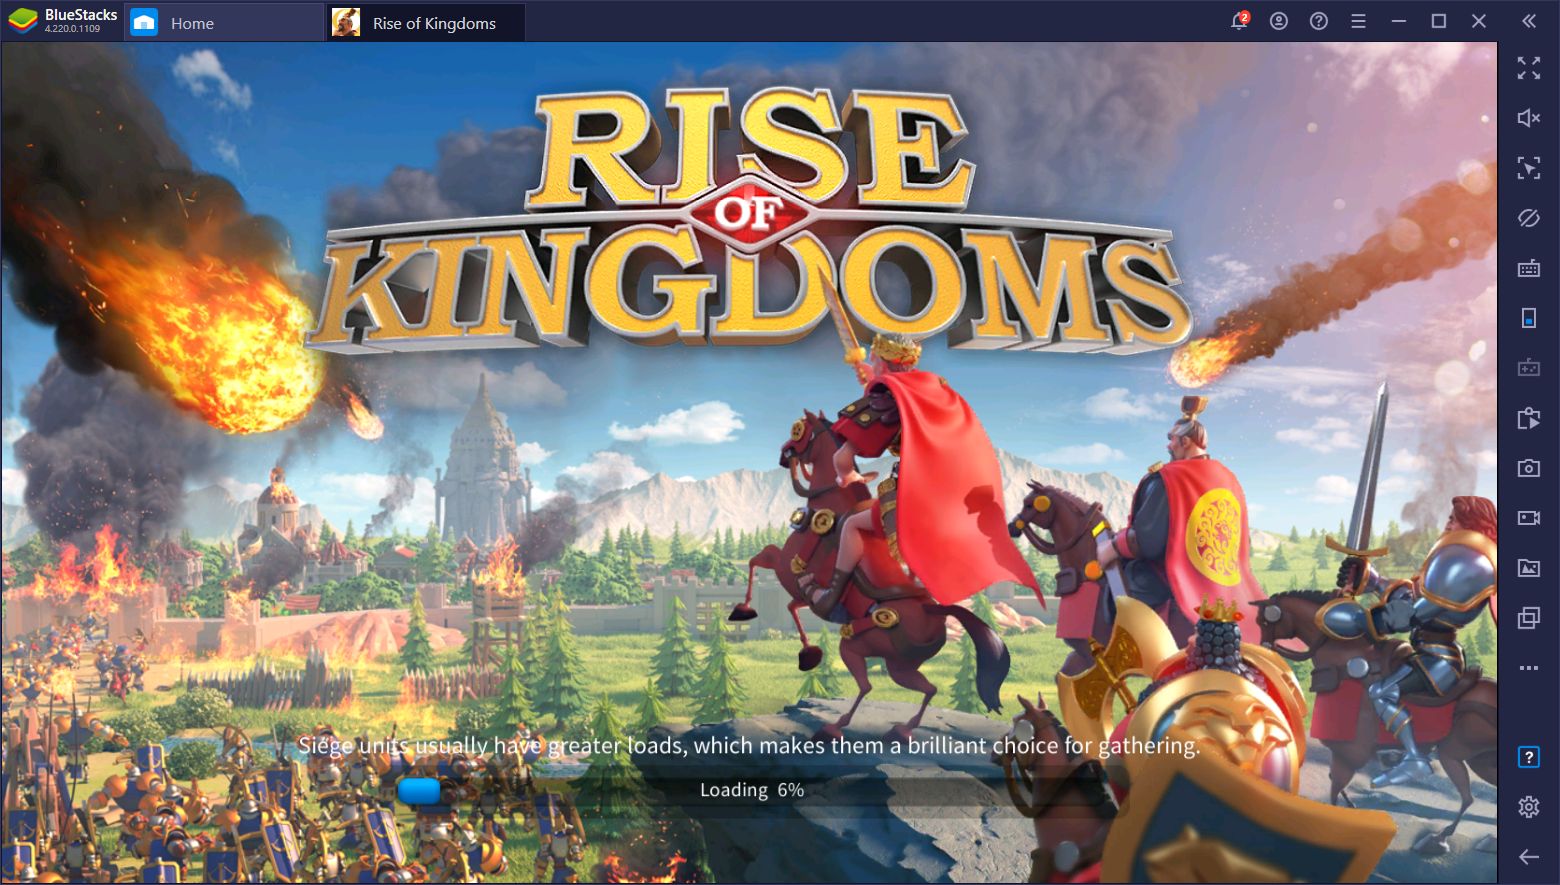 Rise of Kingdoms - Common Account Issues When Playing on Multiple Devices